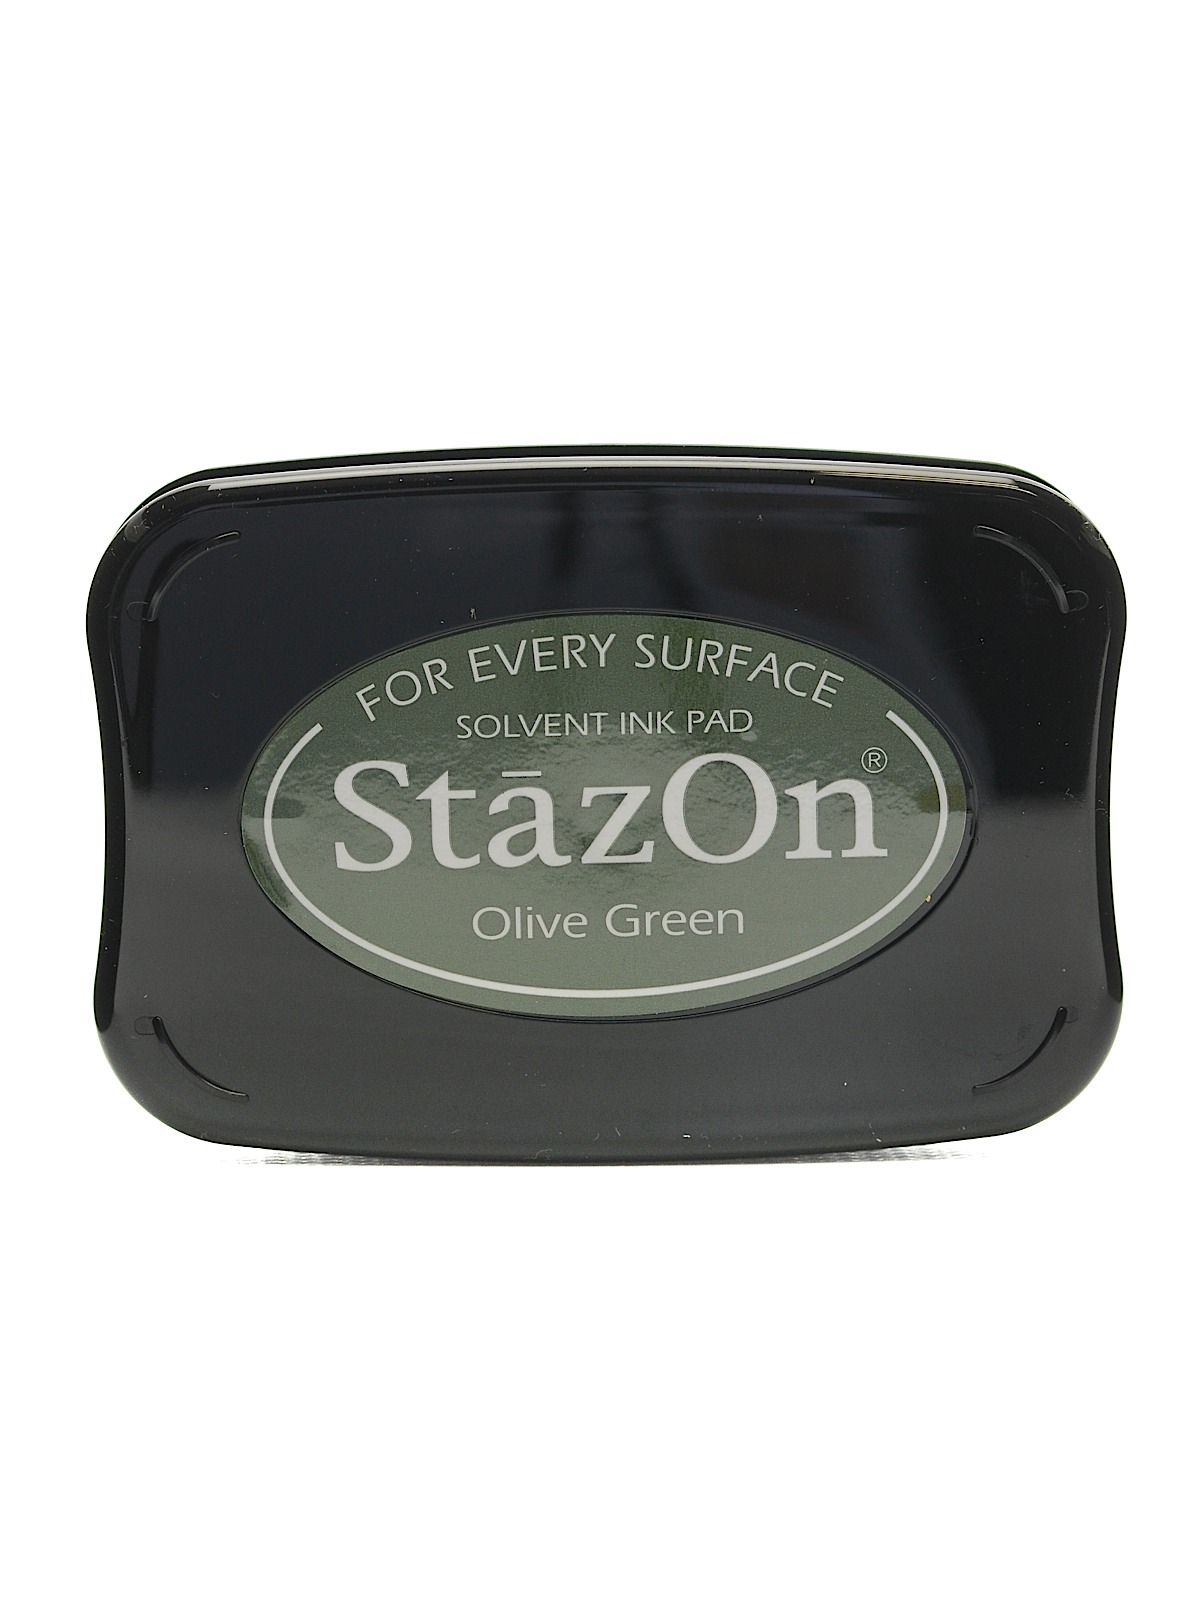 Stazon Solvent Ink Olive Green 3.75 In. X 2.625 In. Full-size Pad